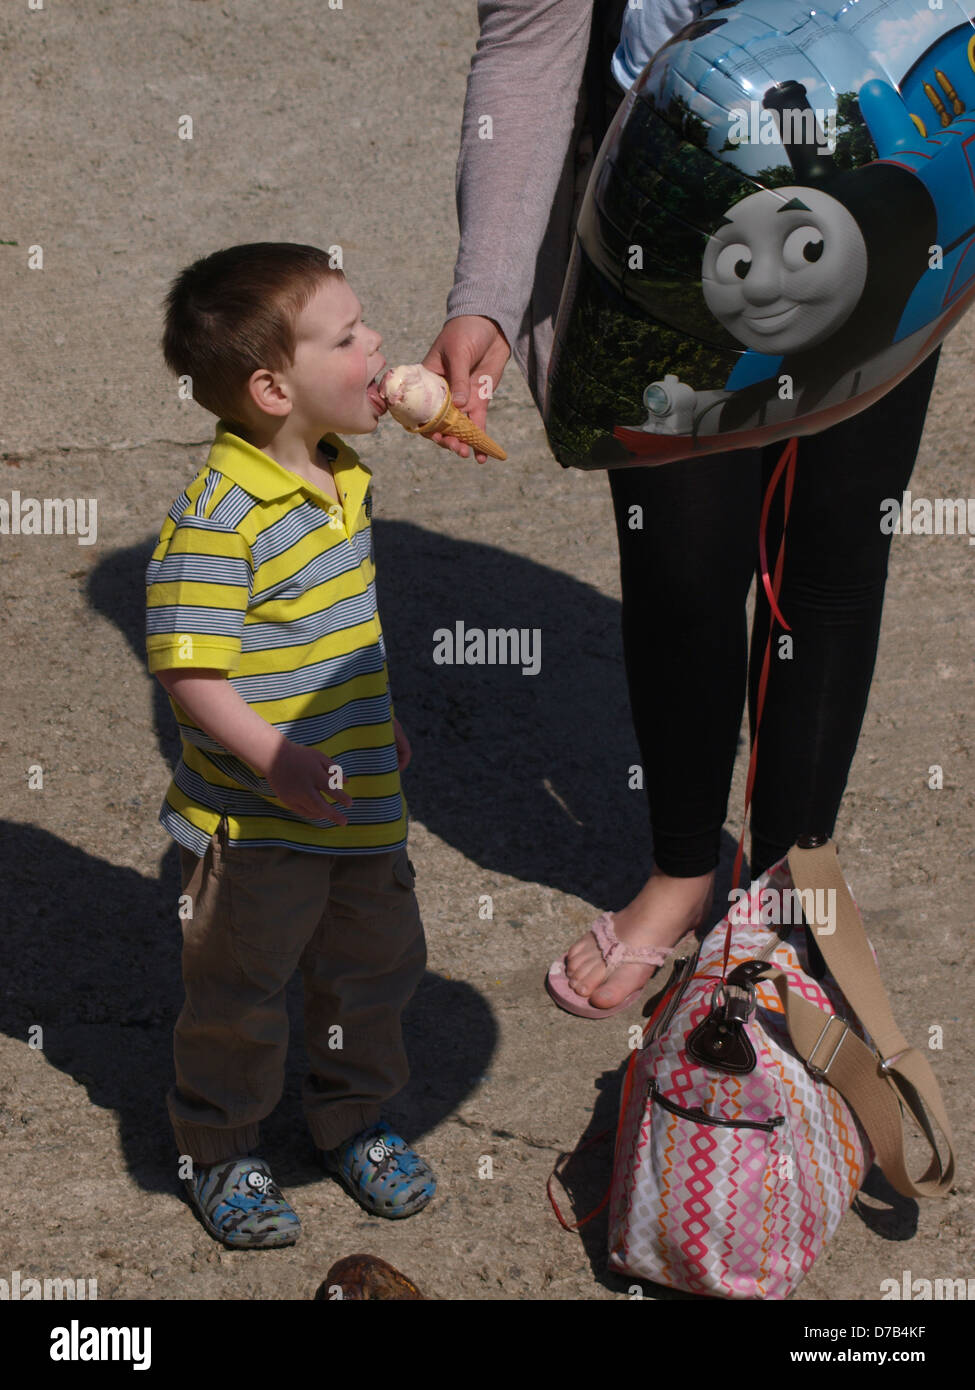 Young boy licking his mother's icecream, UK 2013 Stock Photo